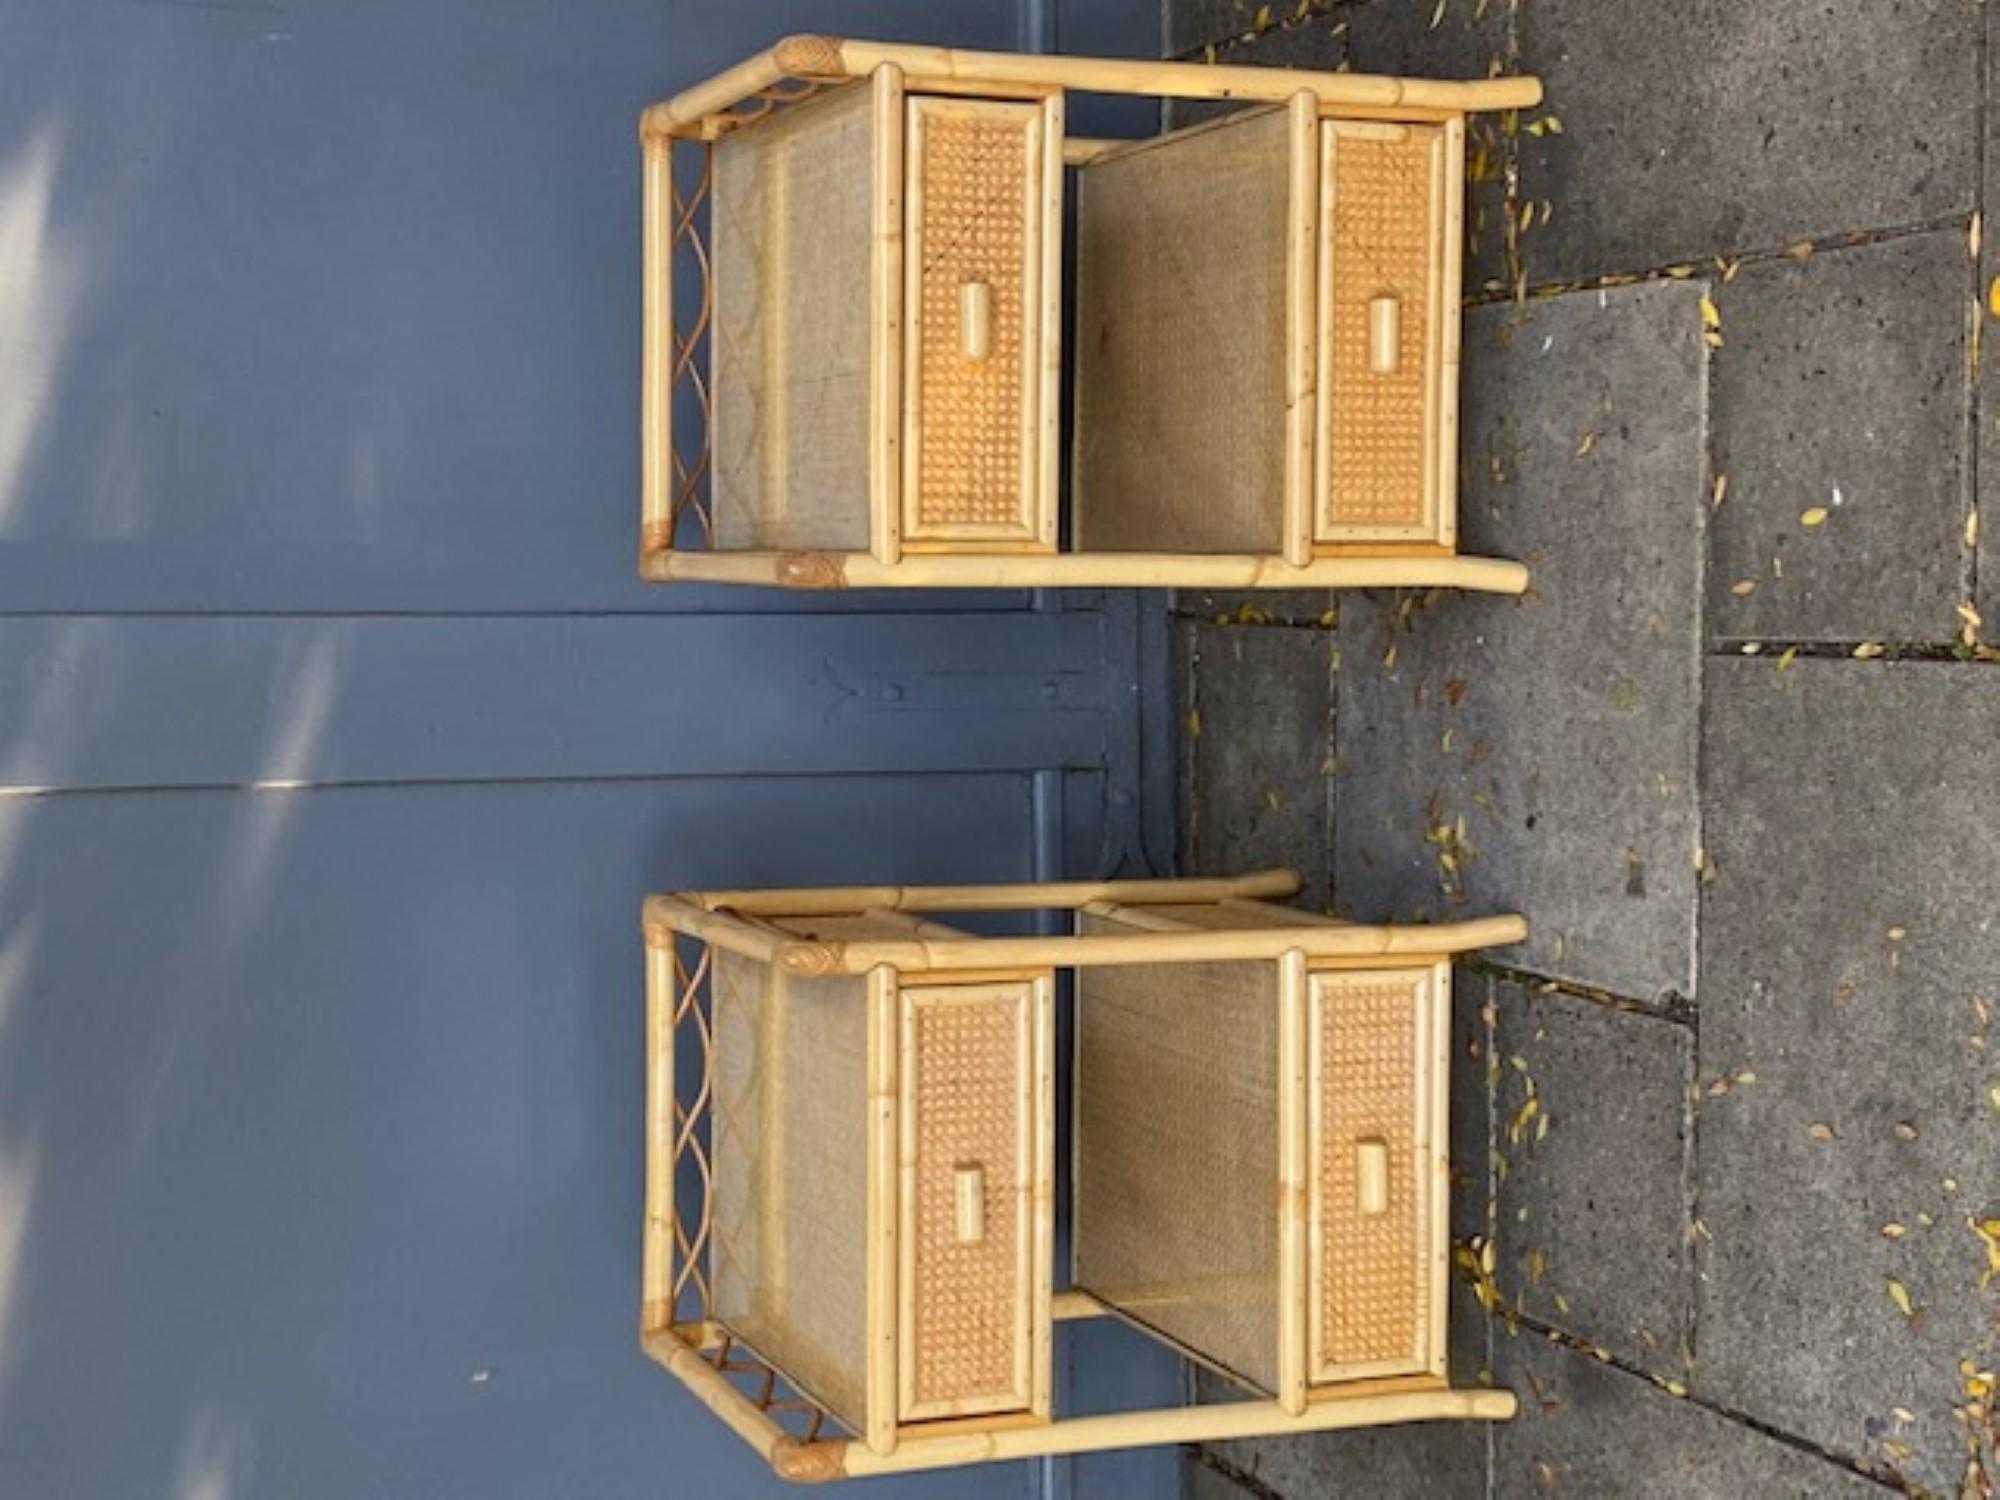 Pair of MCM Rattan / Cane Nightstands / Bedside Tables, Angraves, English, 1970s For Sale 6